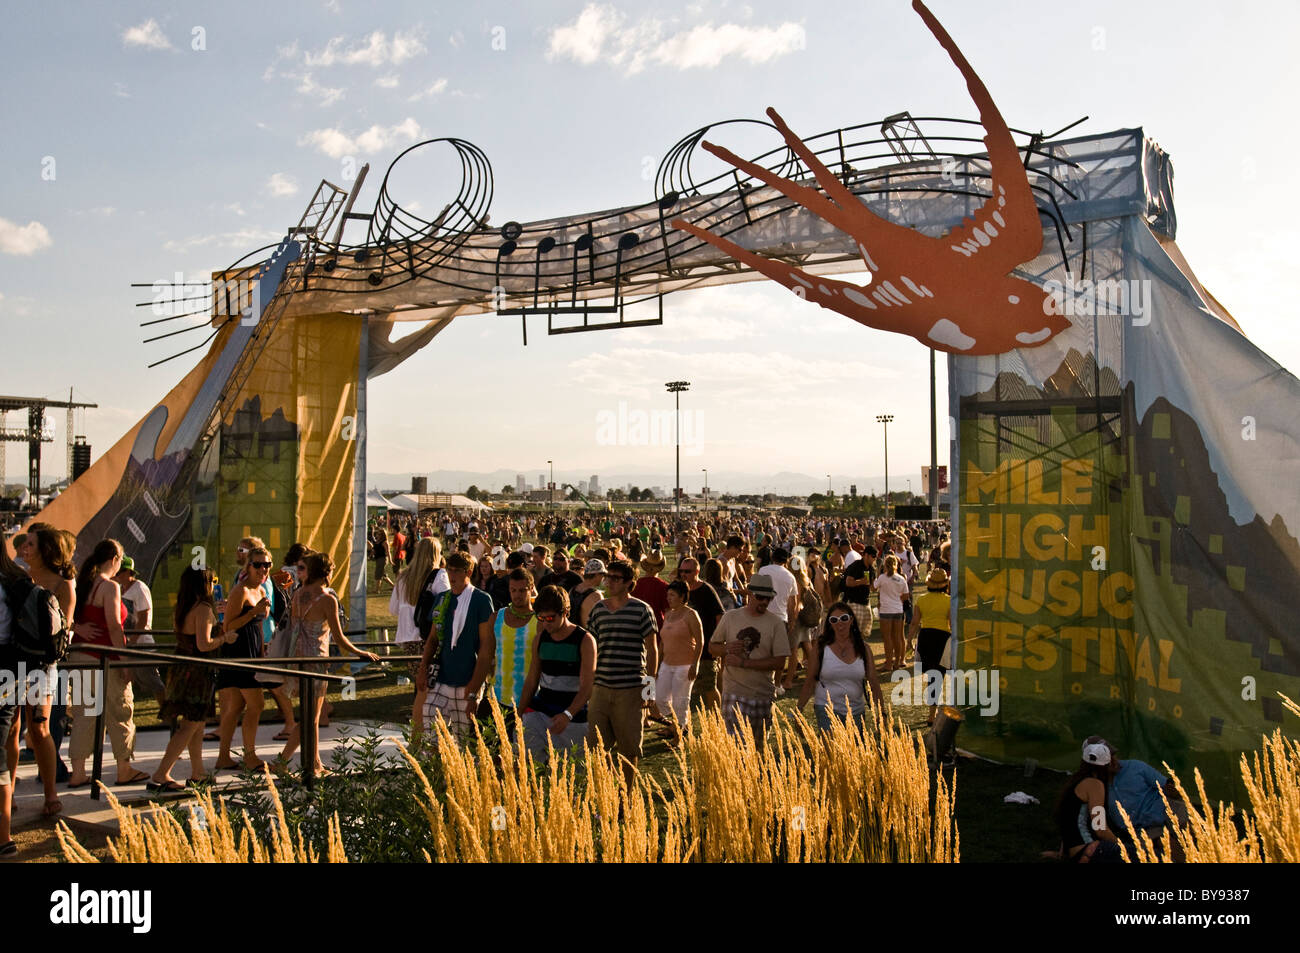 Mile High Music Festival entrance to main stage Stock Photo - Alamy